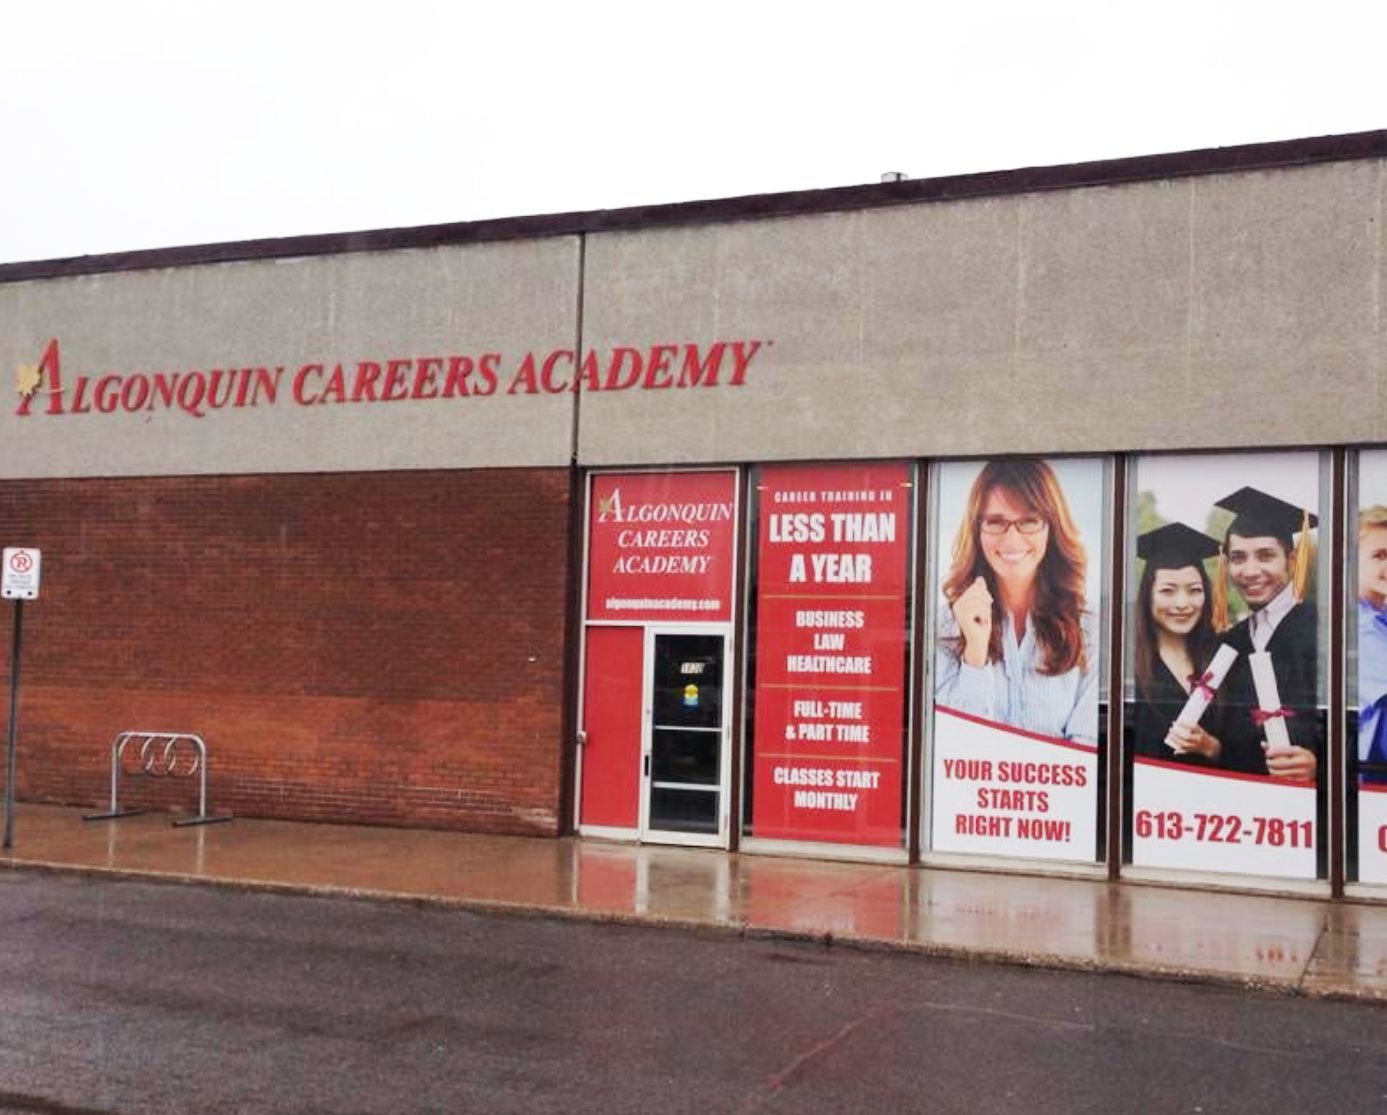 Algonquin Careers Academy to use uLawPractice in curriculum